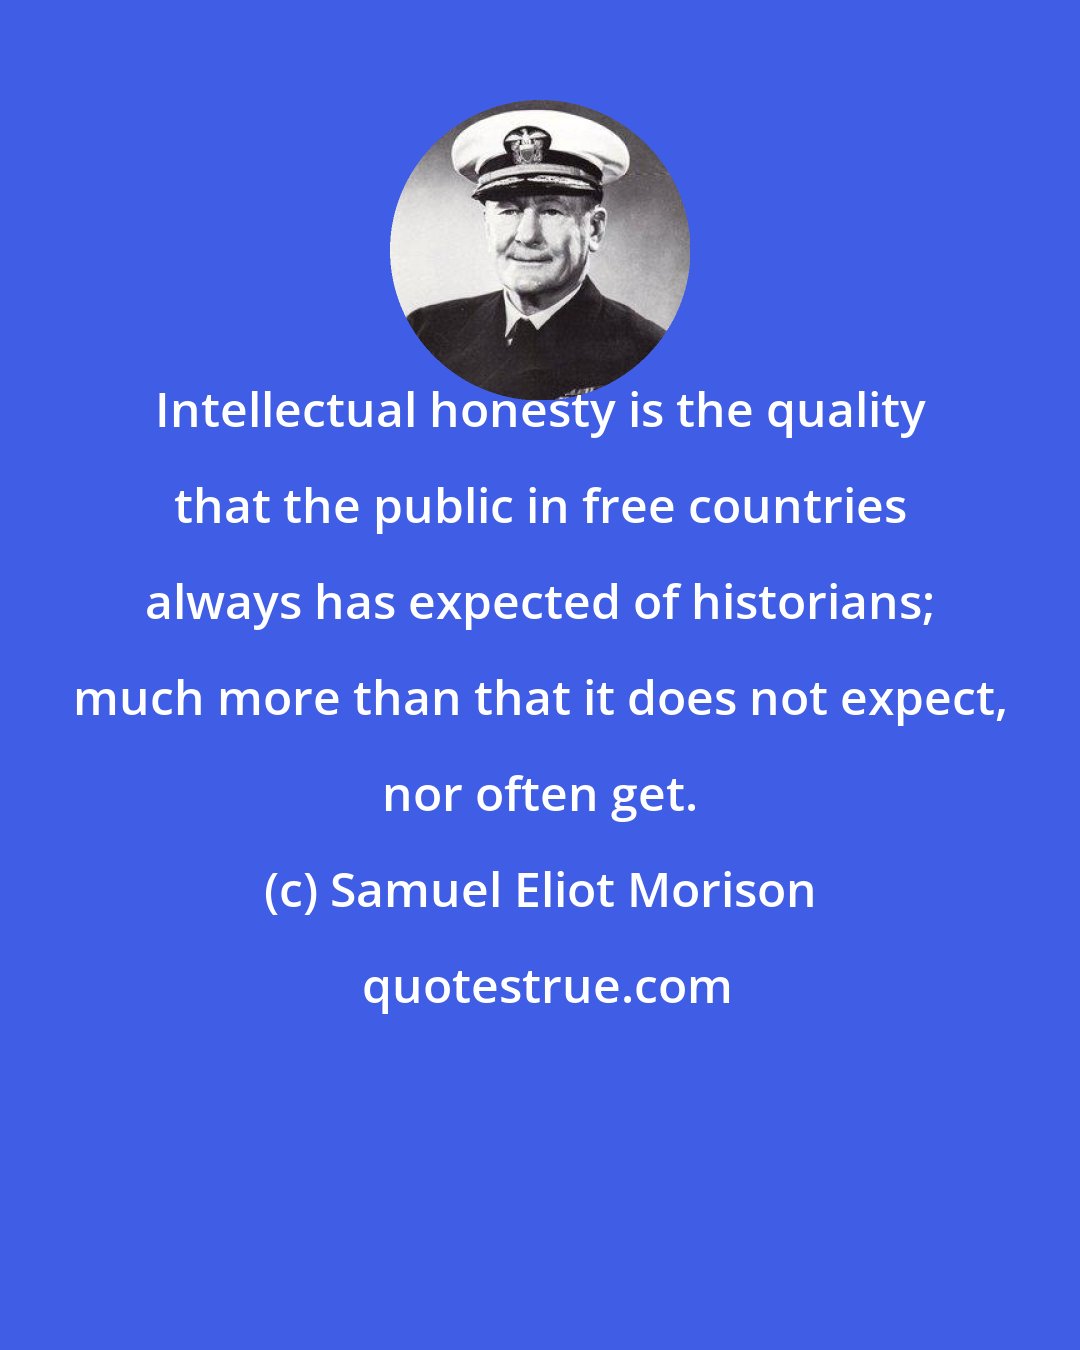 Samuel Eliot Morison: Intellectual honesty is the quality that the public in free countries always has expected of historians; much more than that it does not expect, nor often get.